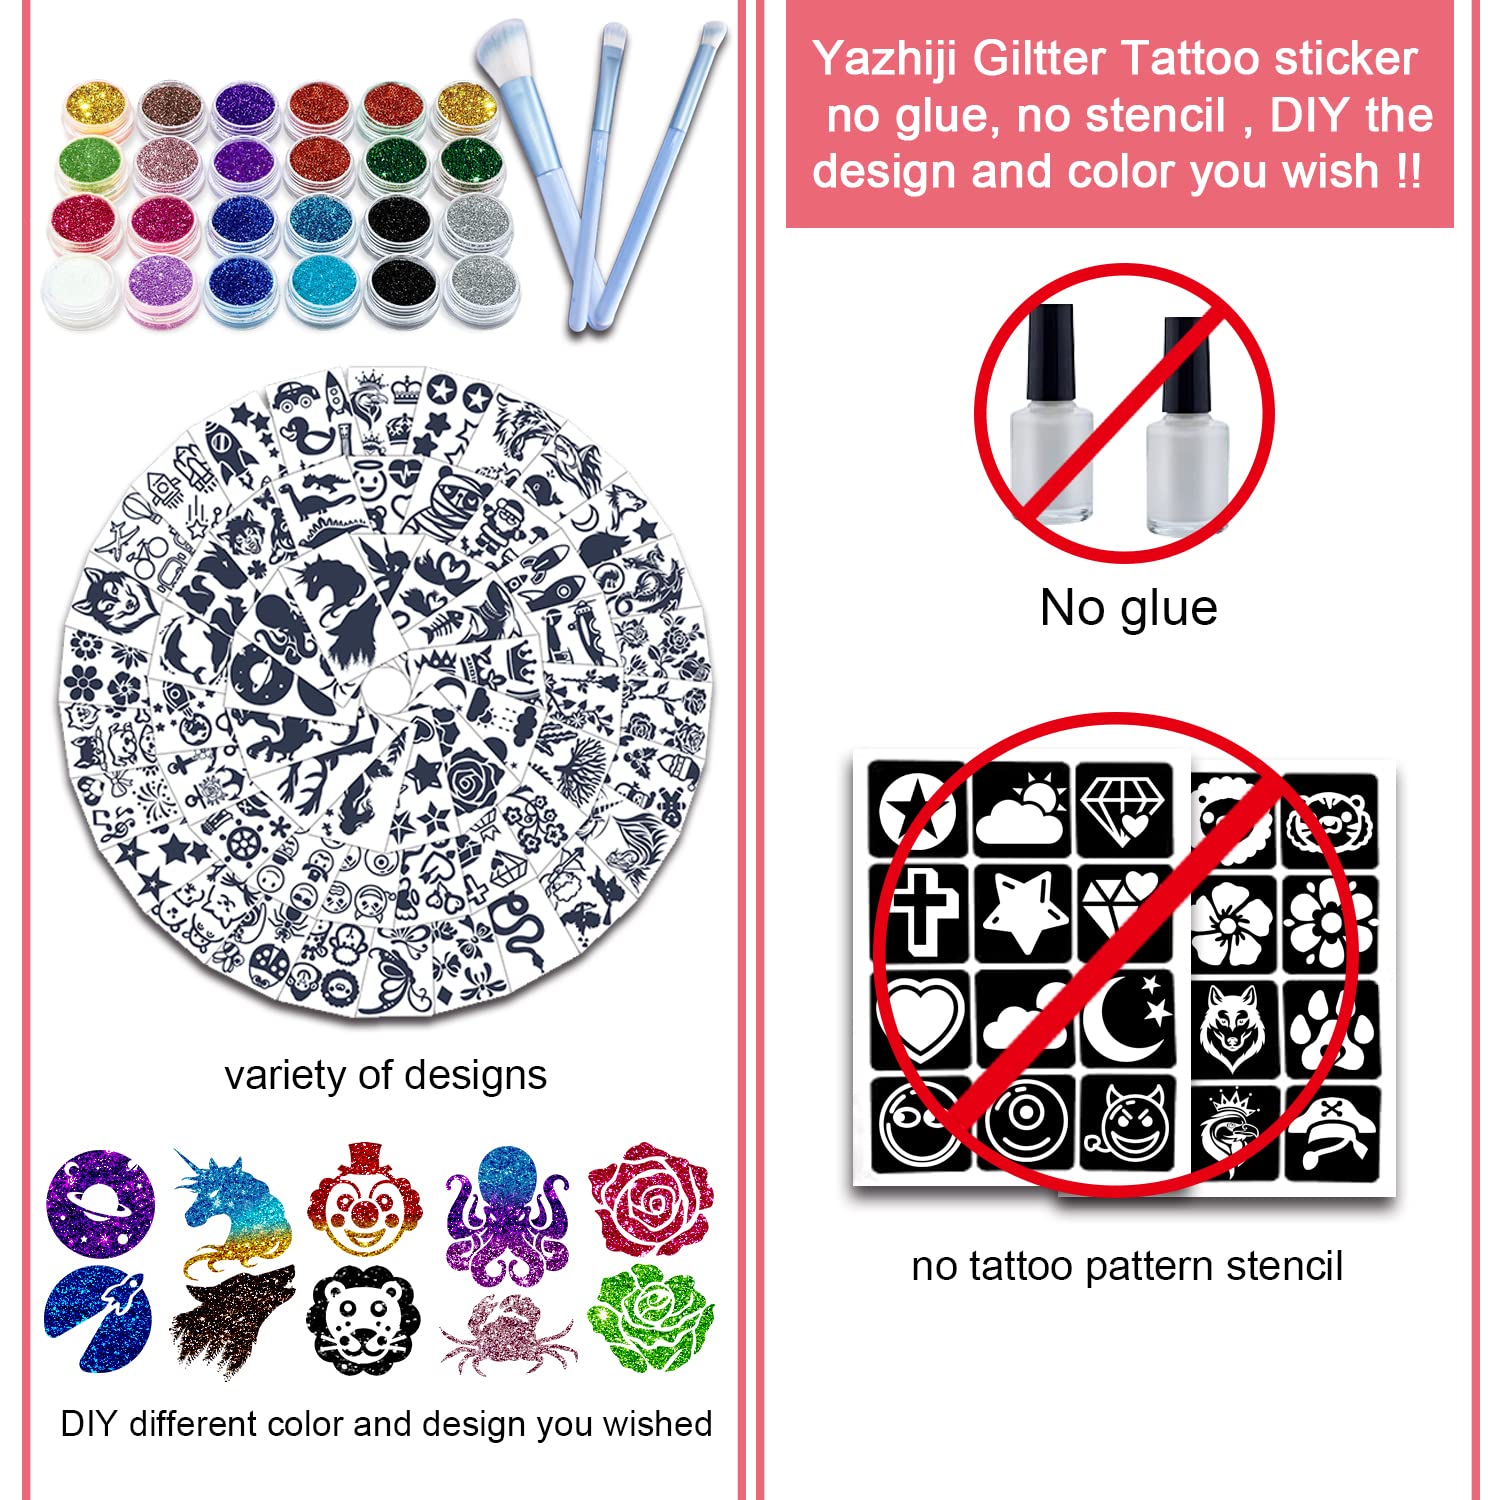 Temporary Glitter Tattoo Kit For Kids -, Dinosaur Butterfly Fake Tattoo Make Up Art Kits For Boys and Girls, DIY Creative Waterproof Tattoos with 90sheets Tat Stickers 24 Glitter Box and 3 Brush